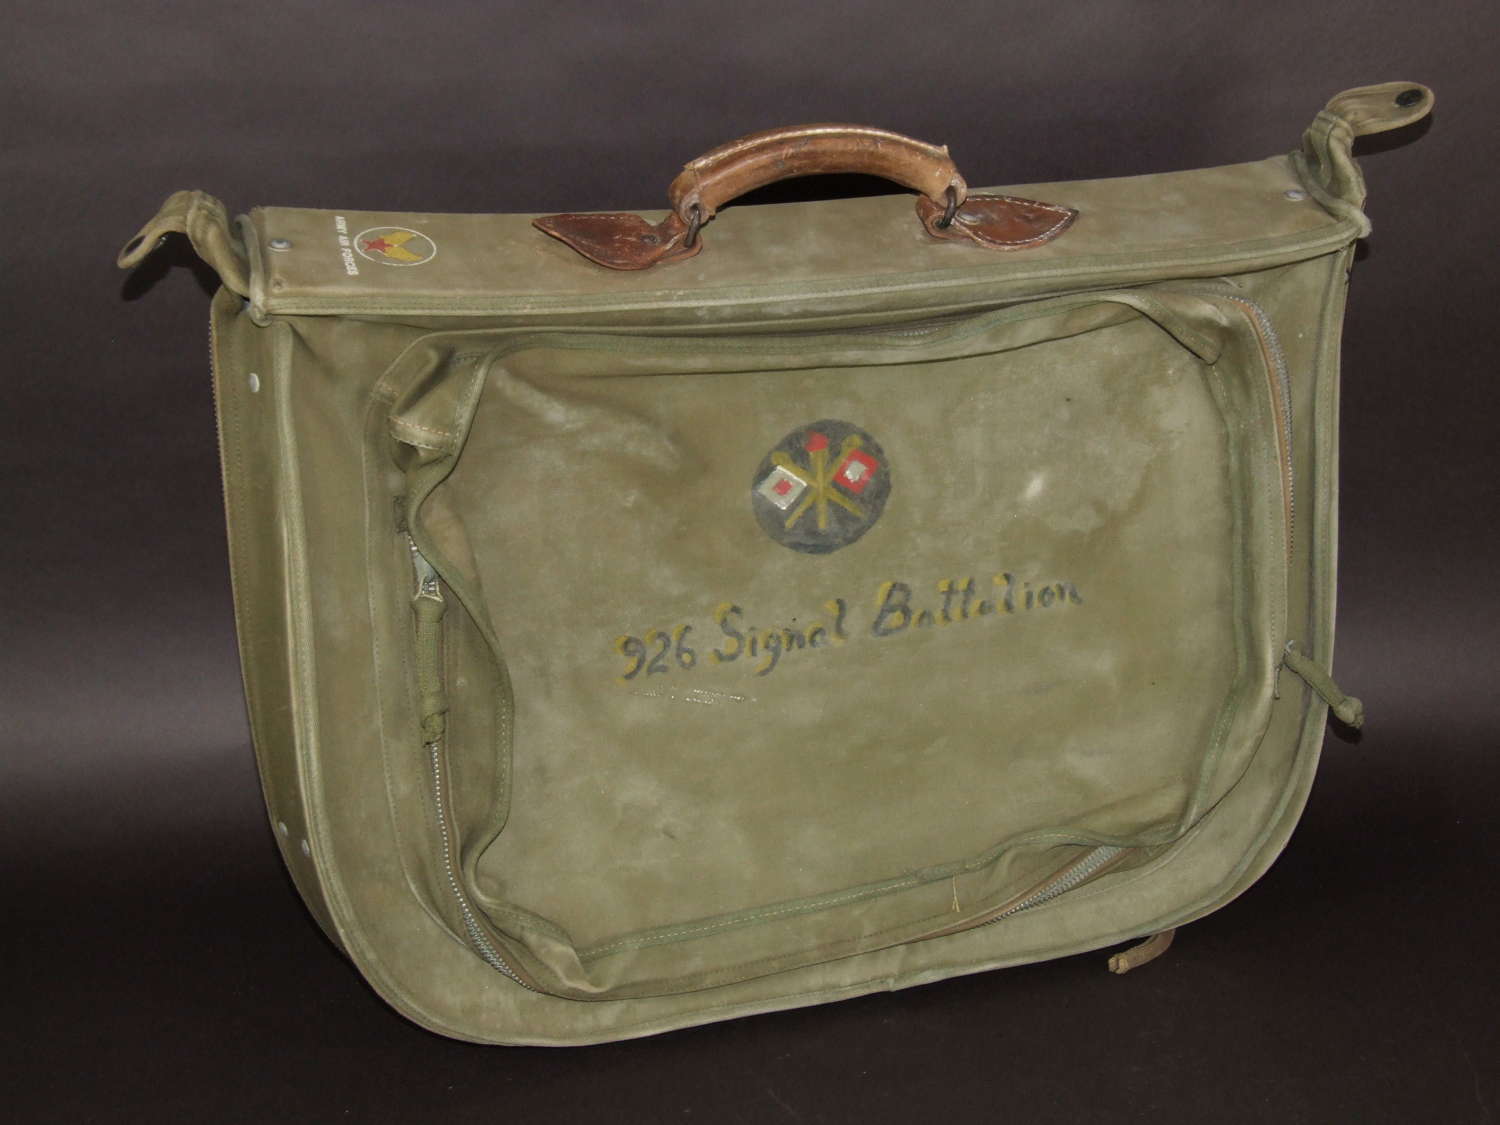 USAAF 8th Air Force Garment Carrier, 926 Signals, WW2 UK Based